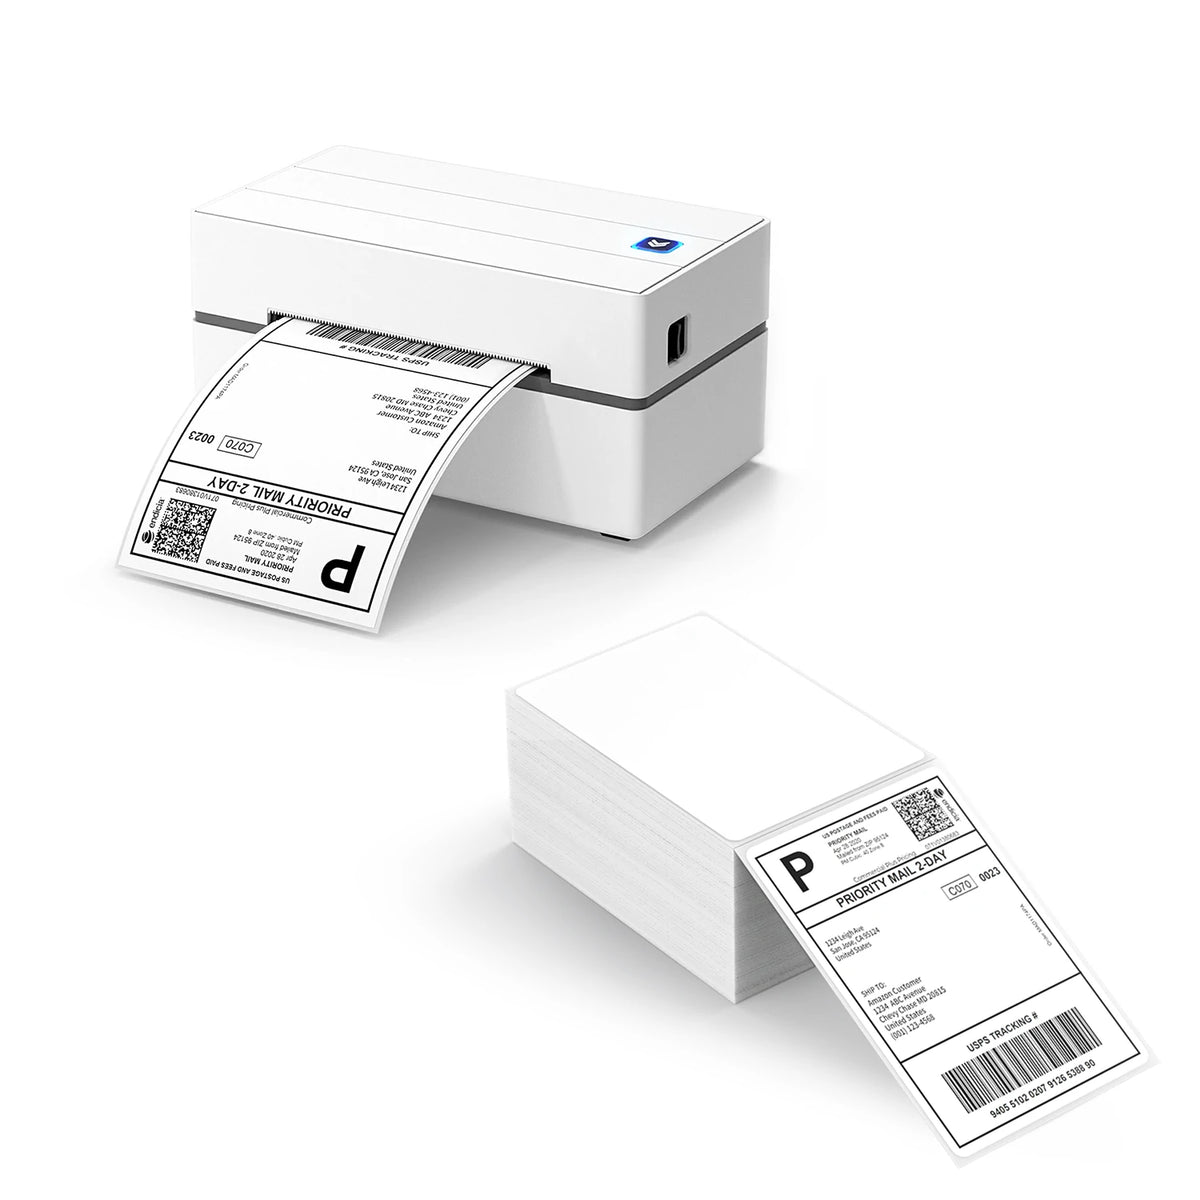 The MUNBYN 130 thermal printer kit includes a USB thermal label printer, and a stack of 4x6 shipping labels.